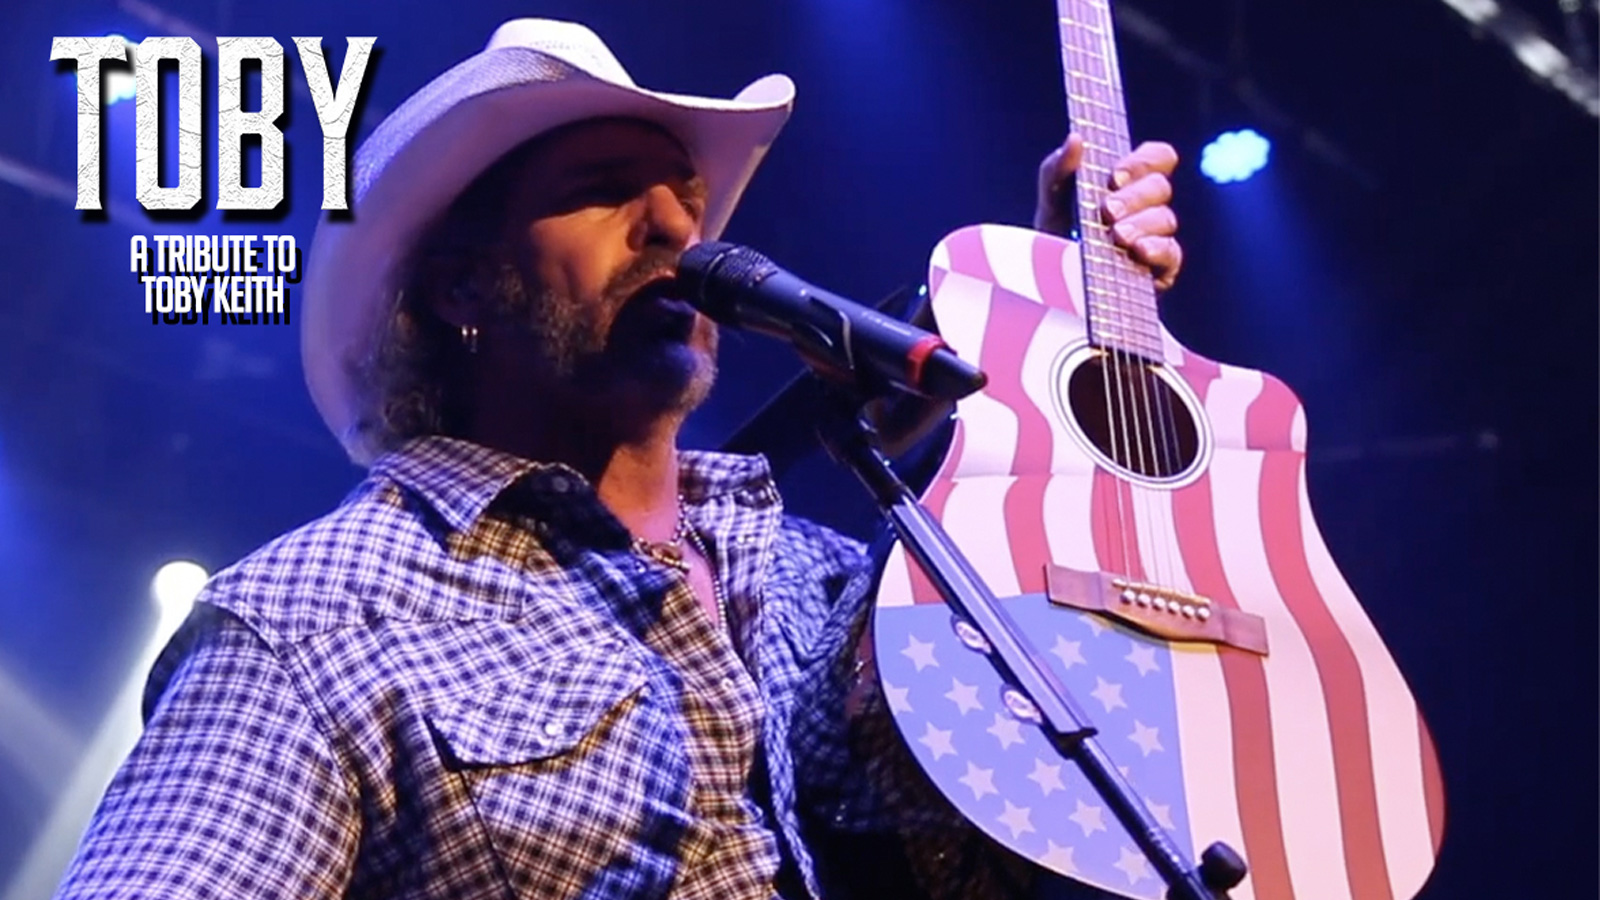 Hollywood Yates playing guitar as Toby Keith